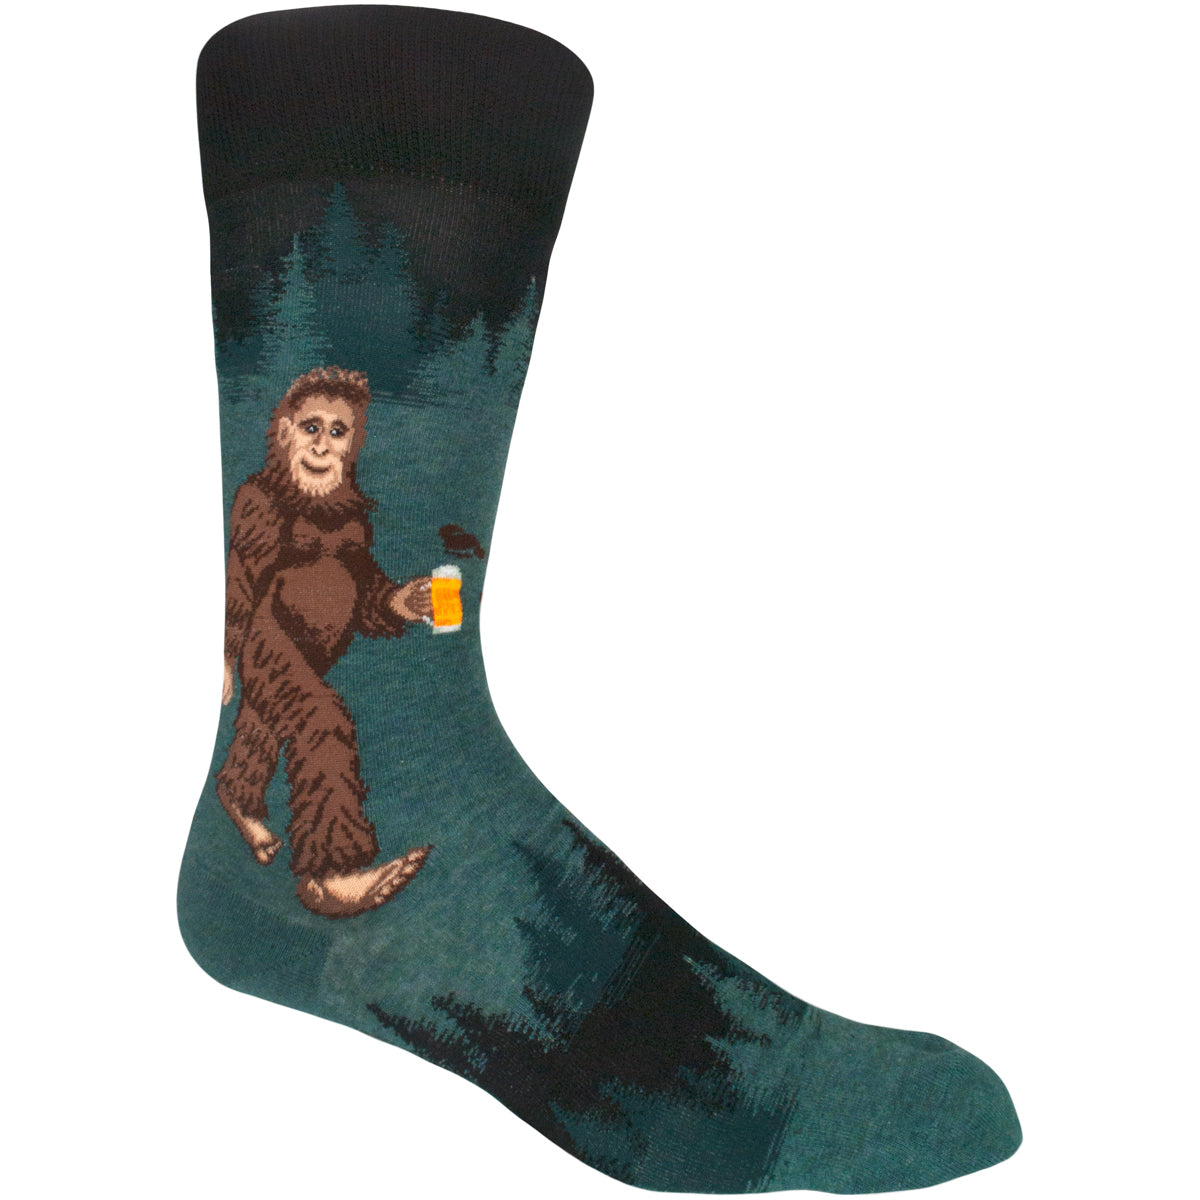 Sasquatch socks for your Bigfoot from ModSocks feature a Sasquatch taking a wilderness stroll with a mug of beer!